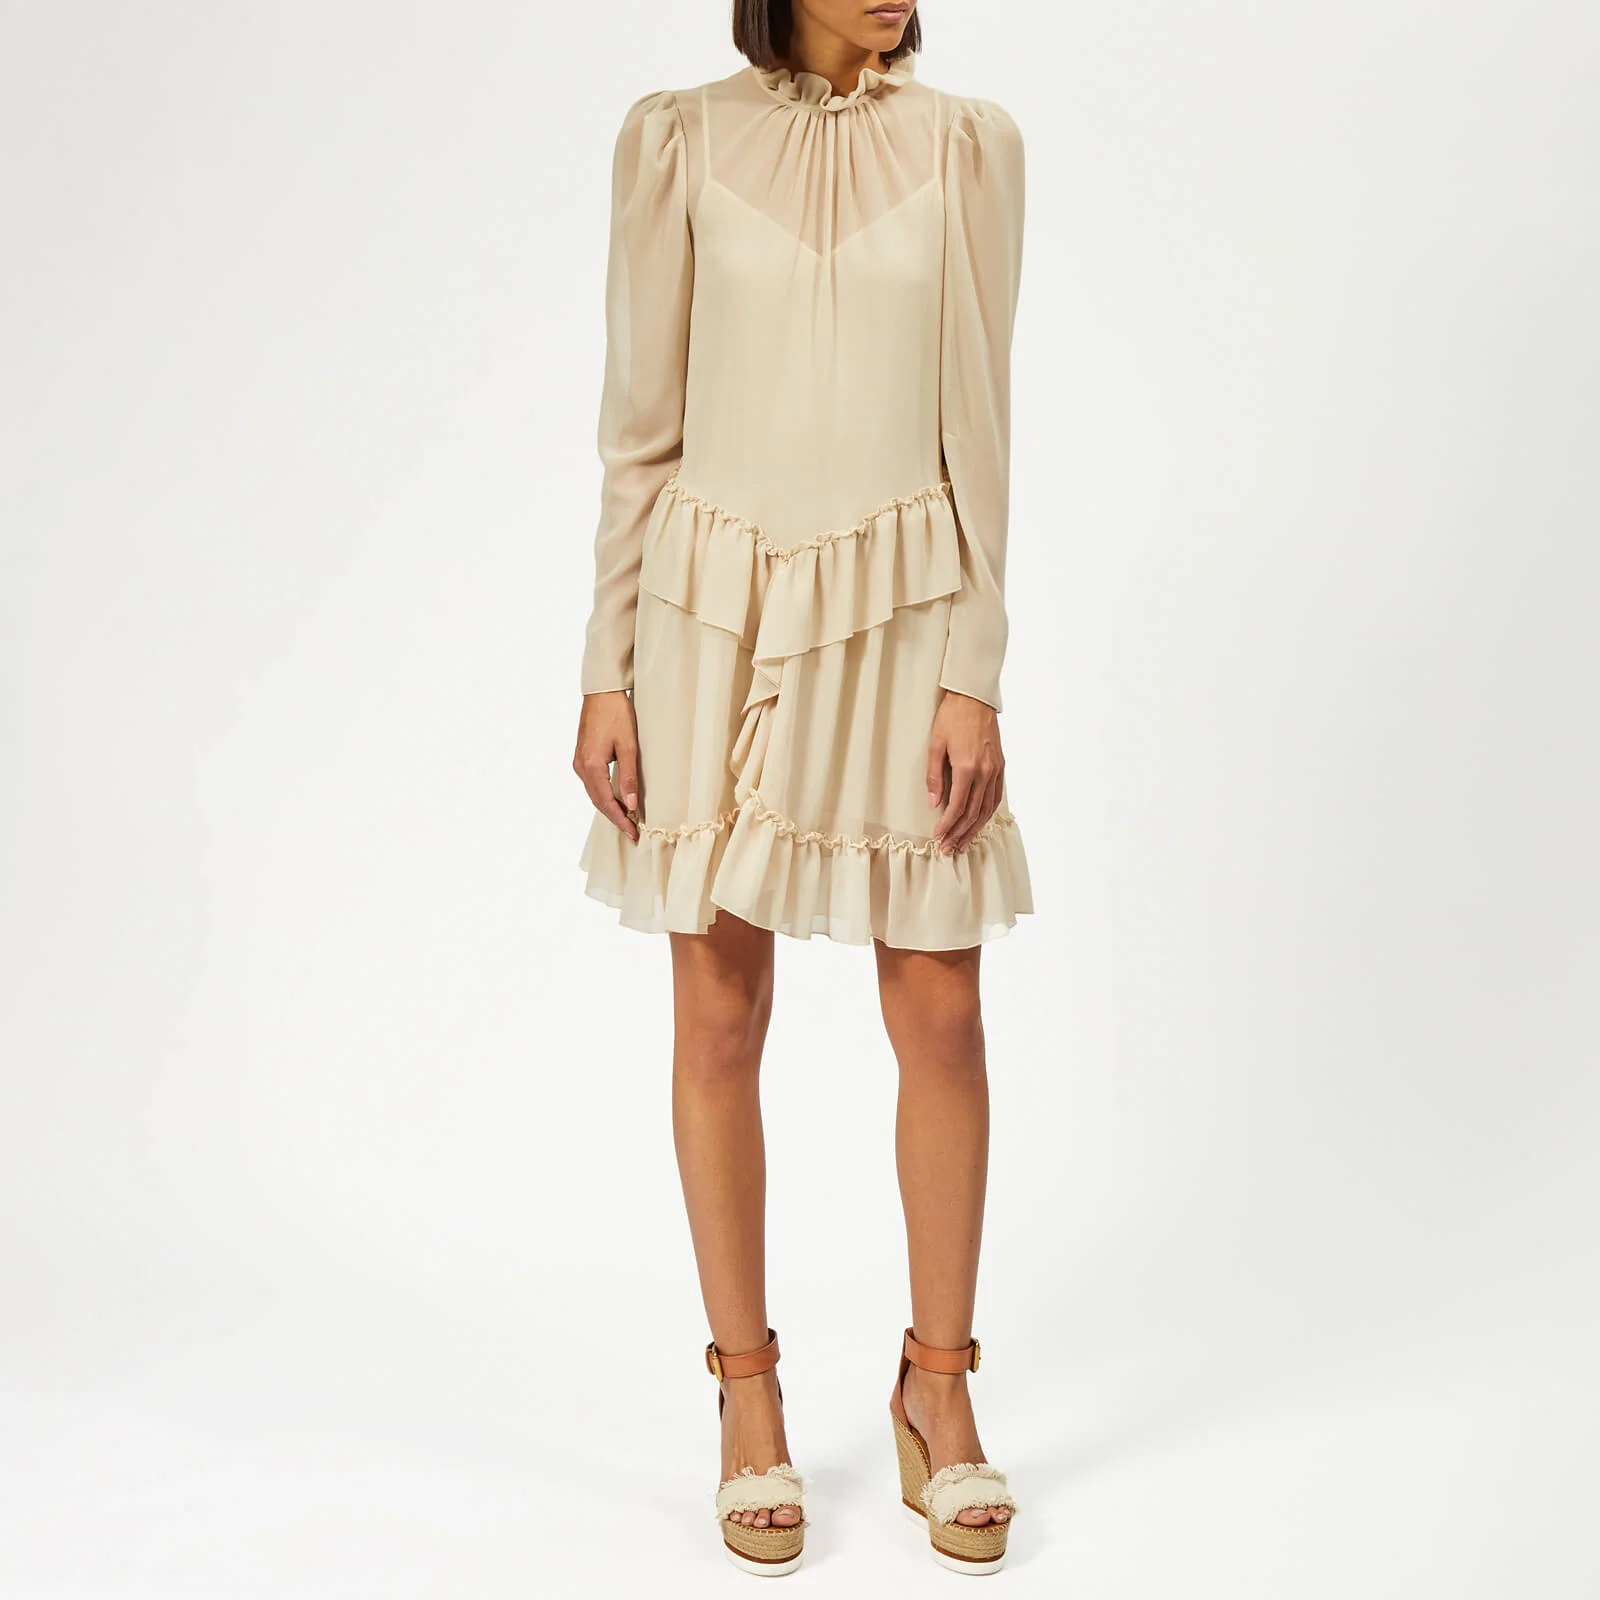 See By Chloé Women's Textured Frill Dress - Foggy Ivory Image 1